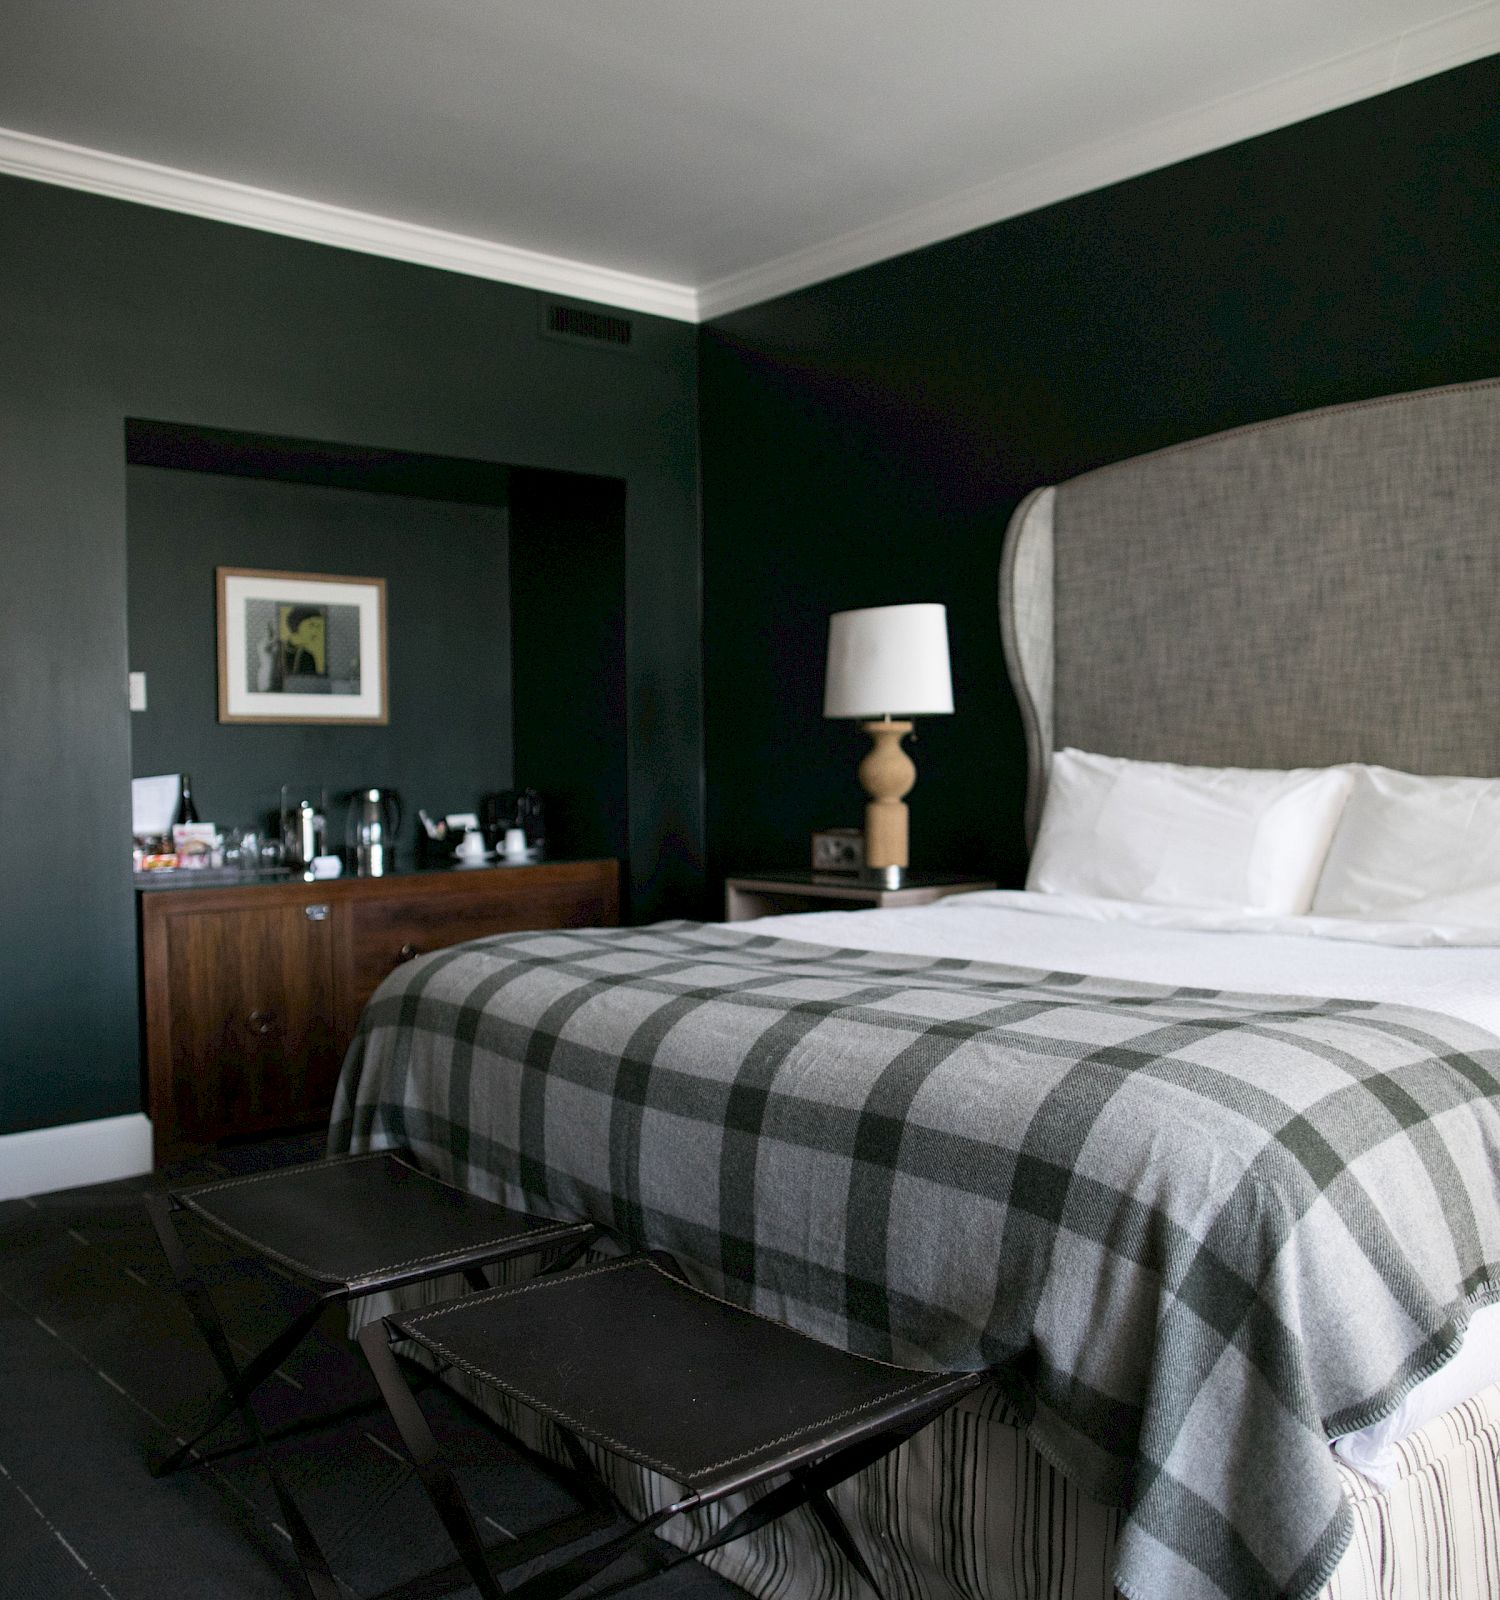 A stylish bedroom features a large bed with a plaid blanket, two stools at the foot, a nightstand with a lamp, and a counter with a framed picture.